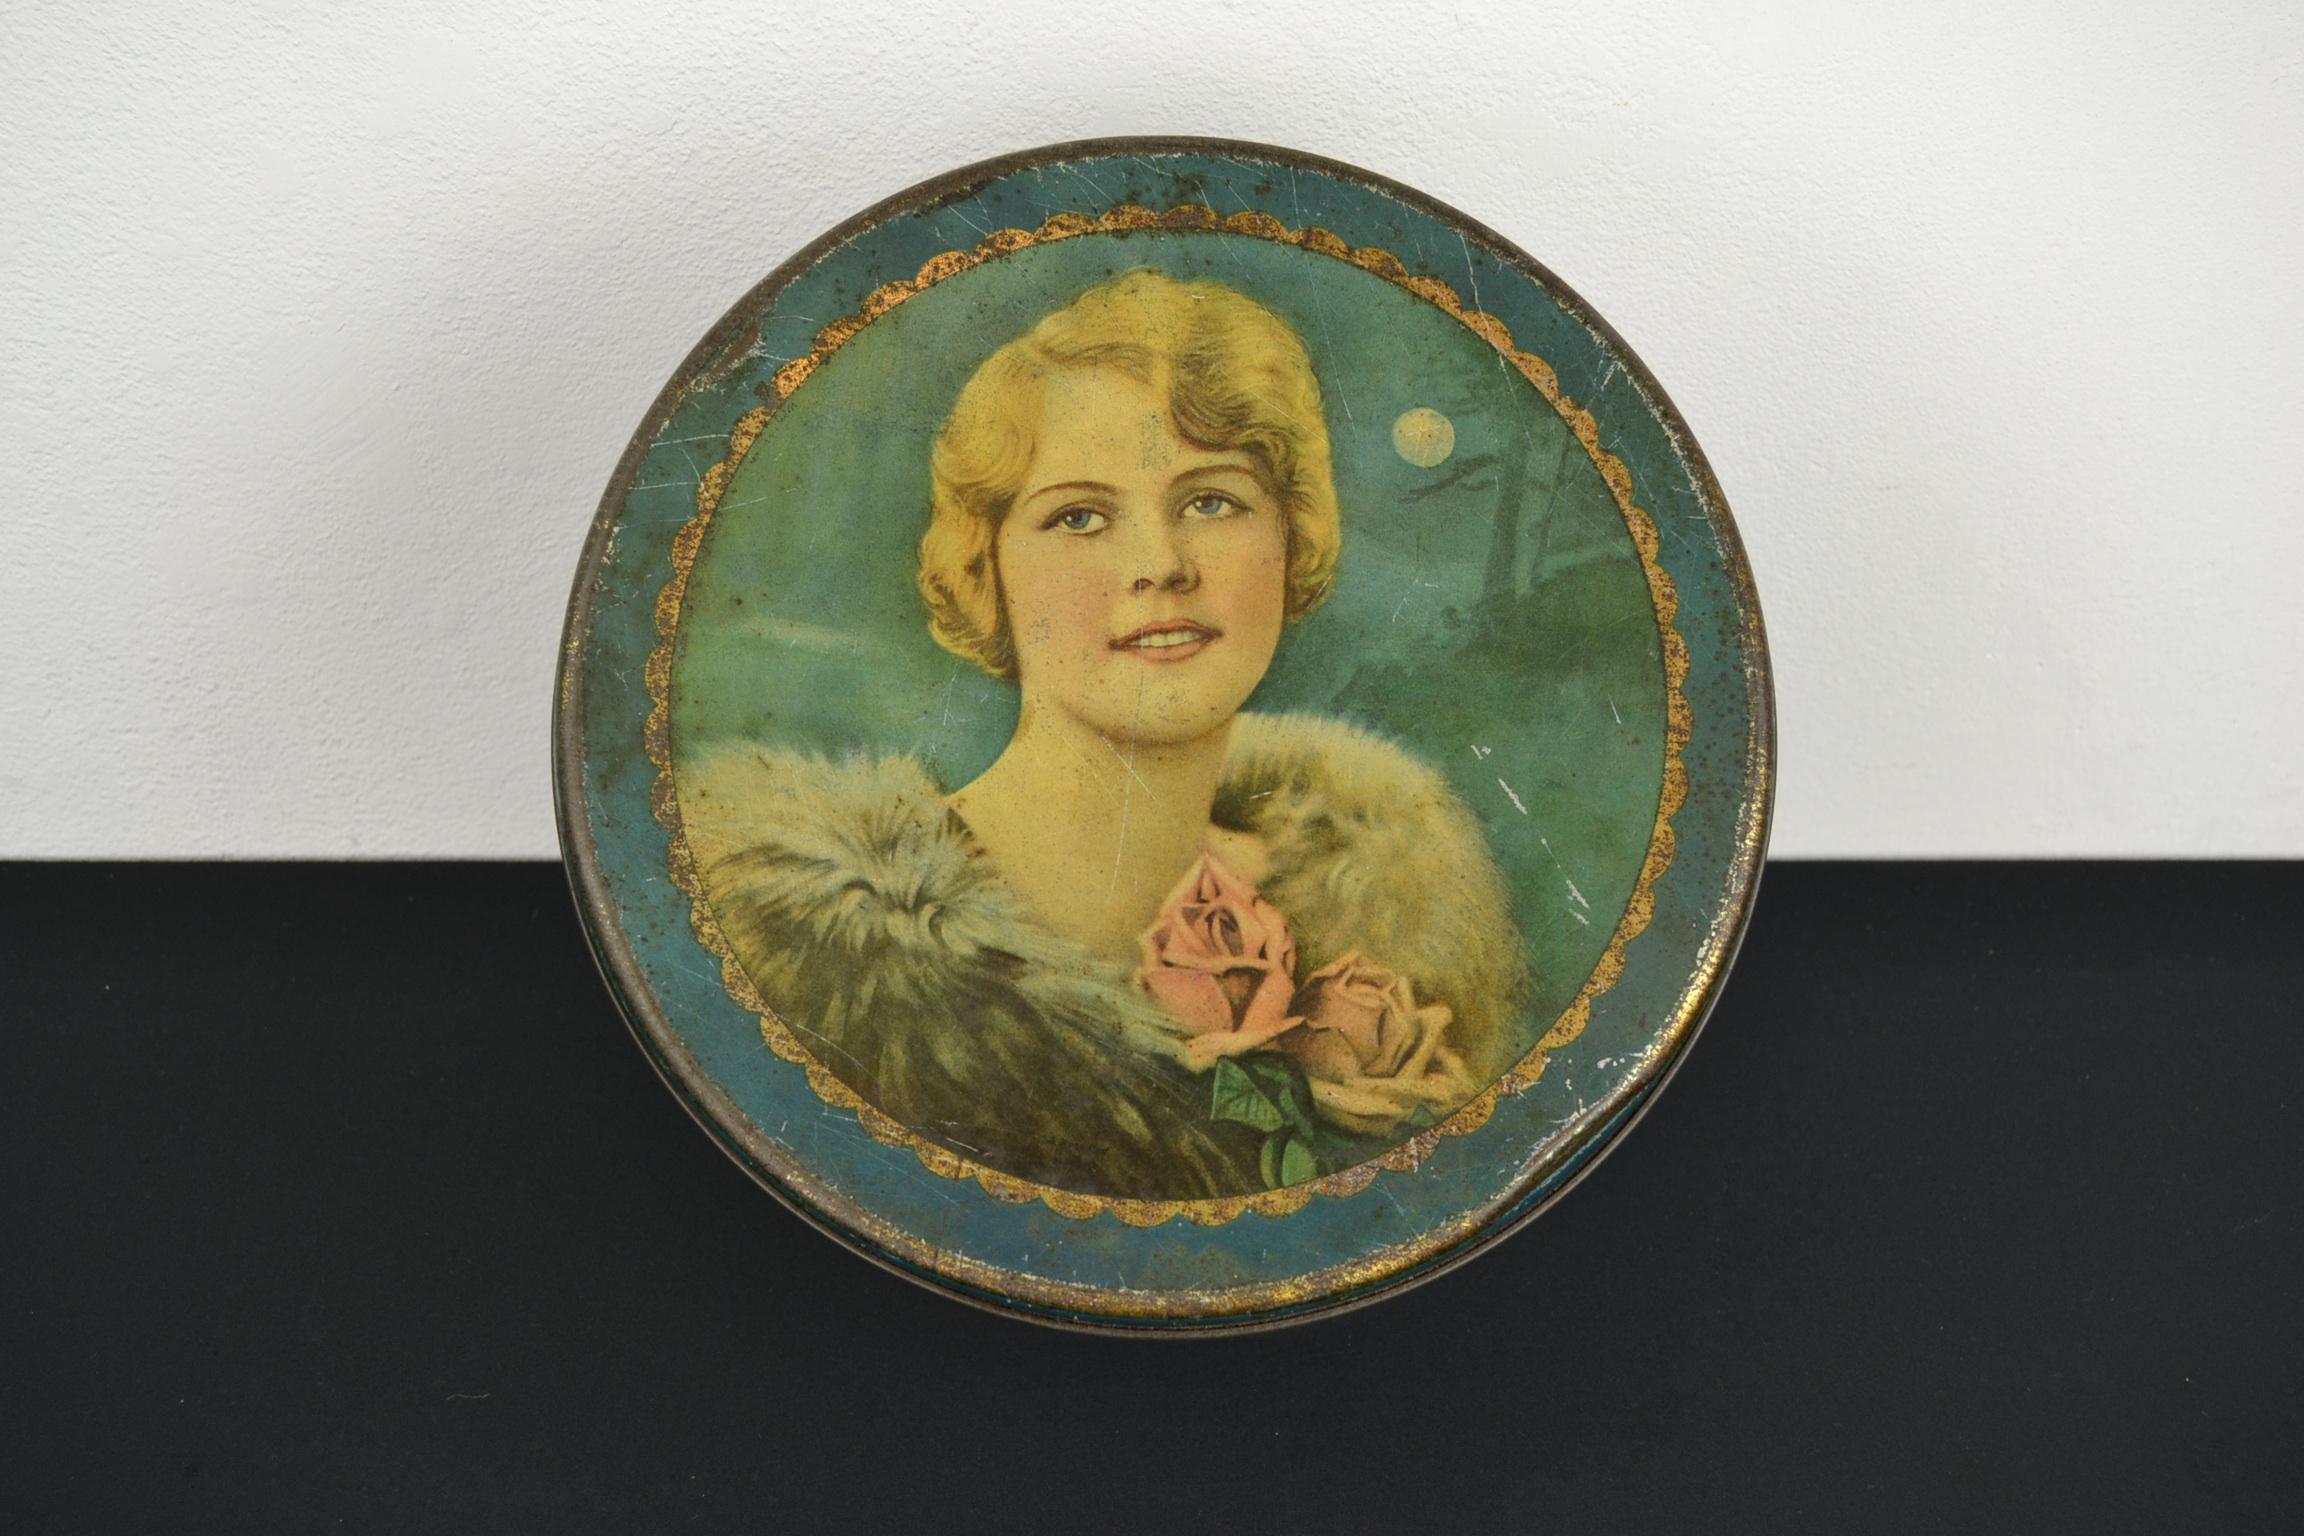 Art deco tin with a woman with stola around her neck.
This elegant lady has blond eyes and blue eyes. 
This round lithographic antique biscuit tin dates circa 1930s. 
Made by Ets. J. Schuybroek - Hoboken - Anvers - Antwerp- Belgium.
It's a blue